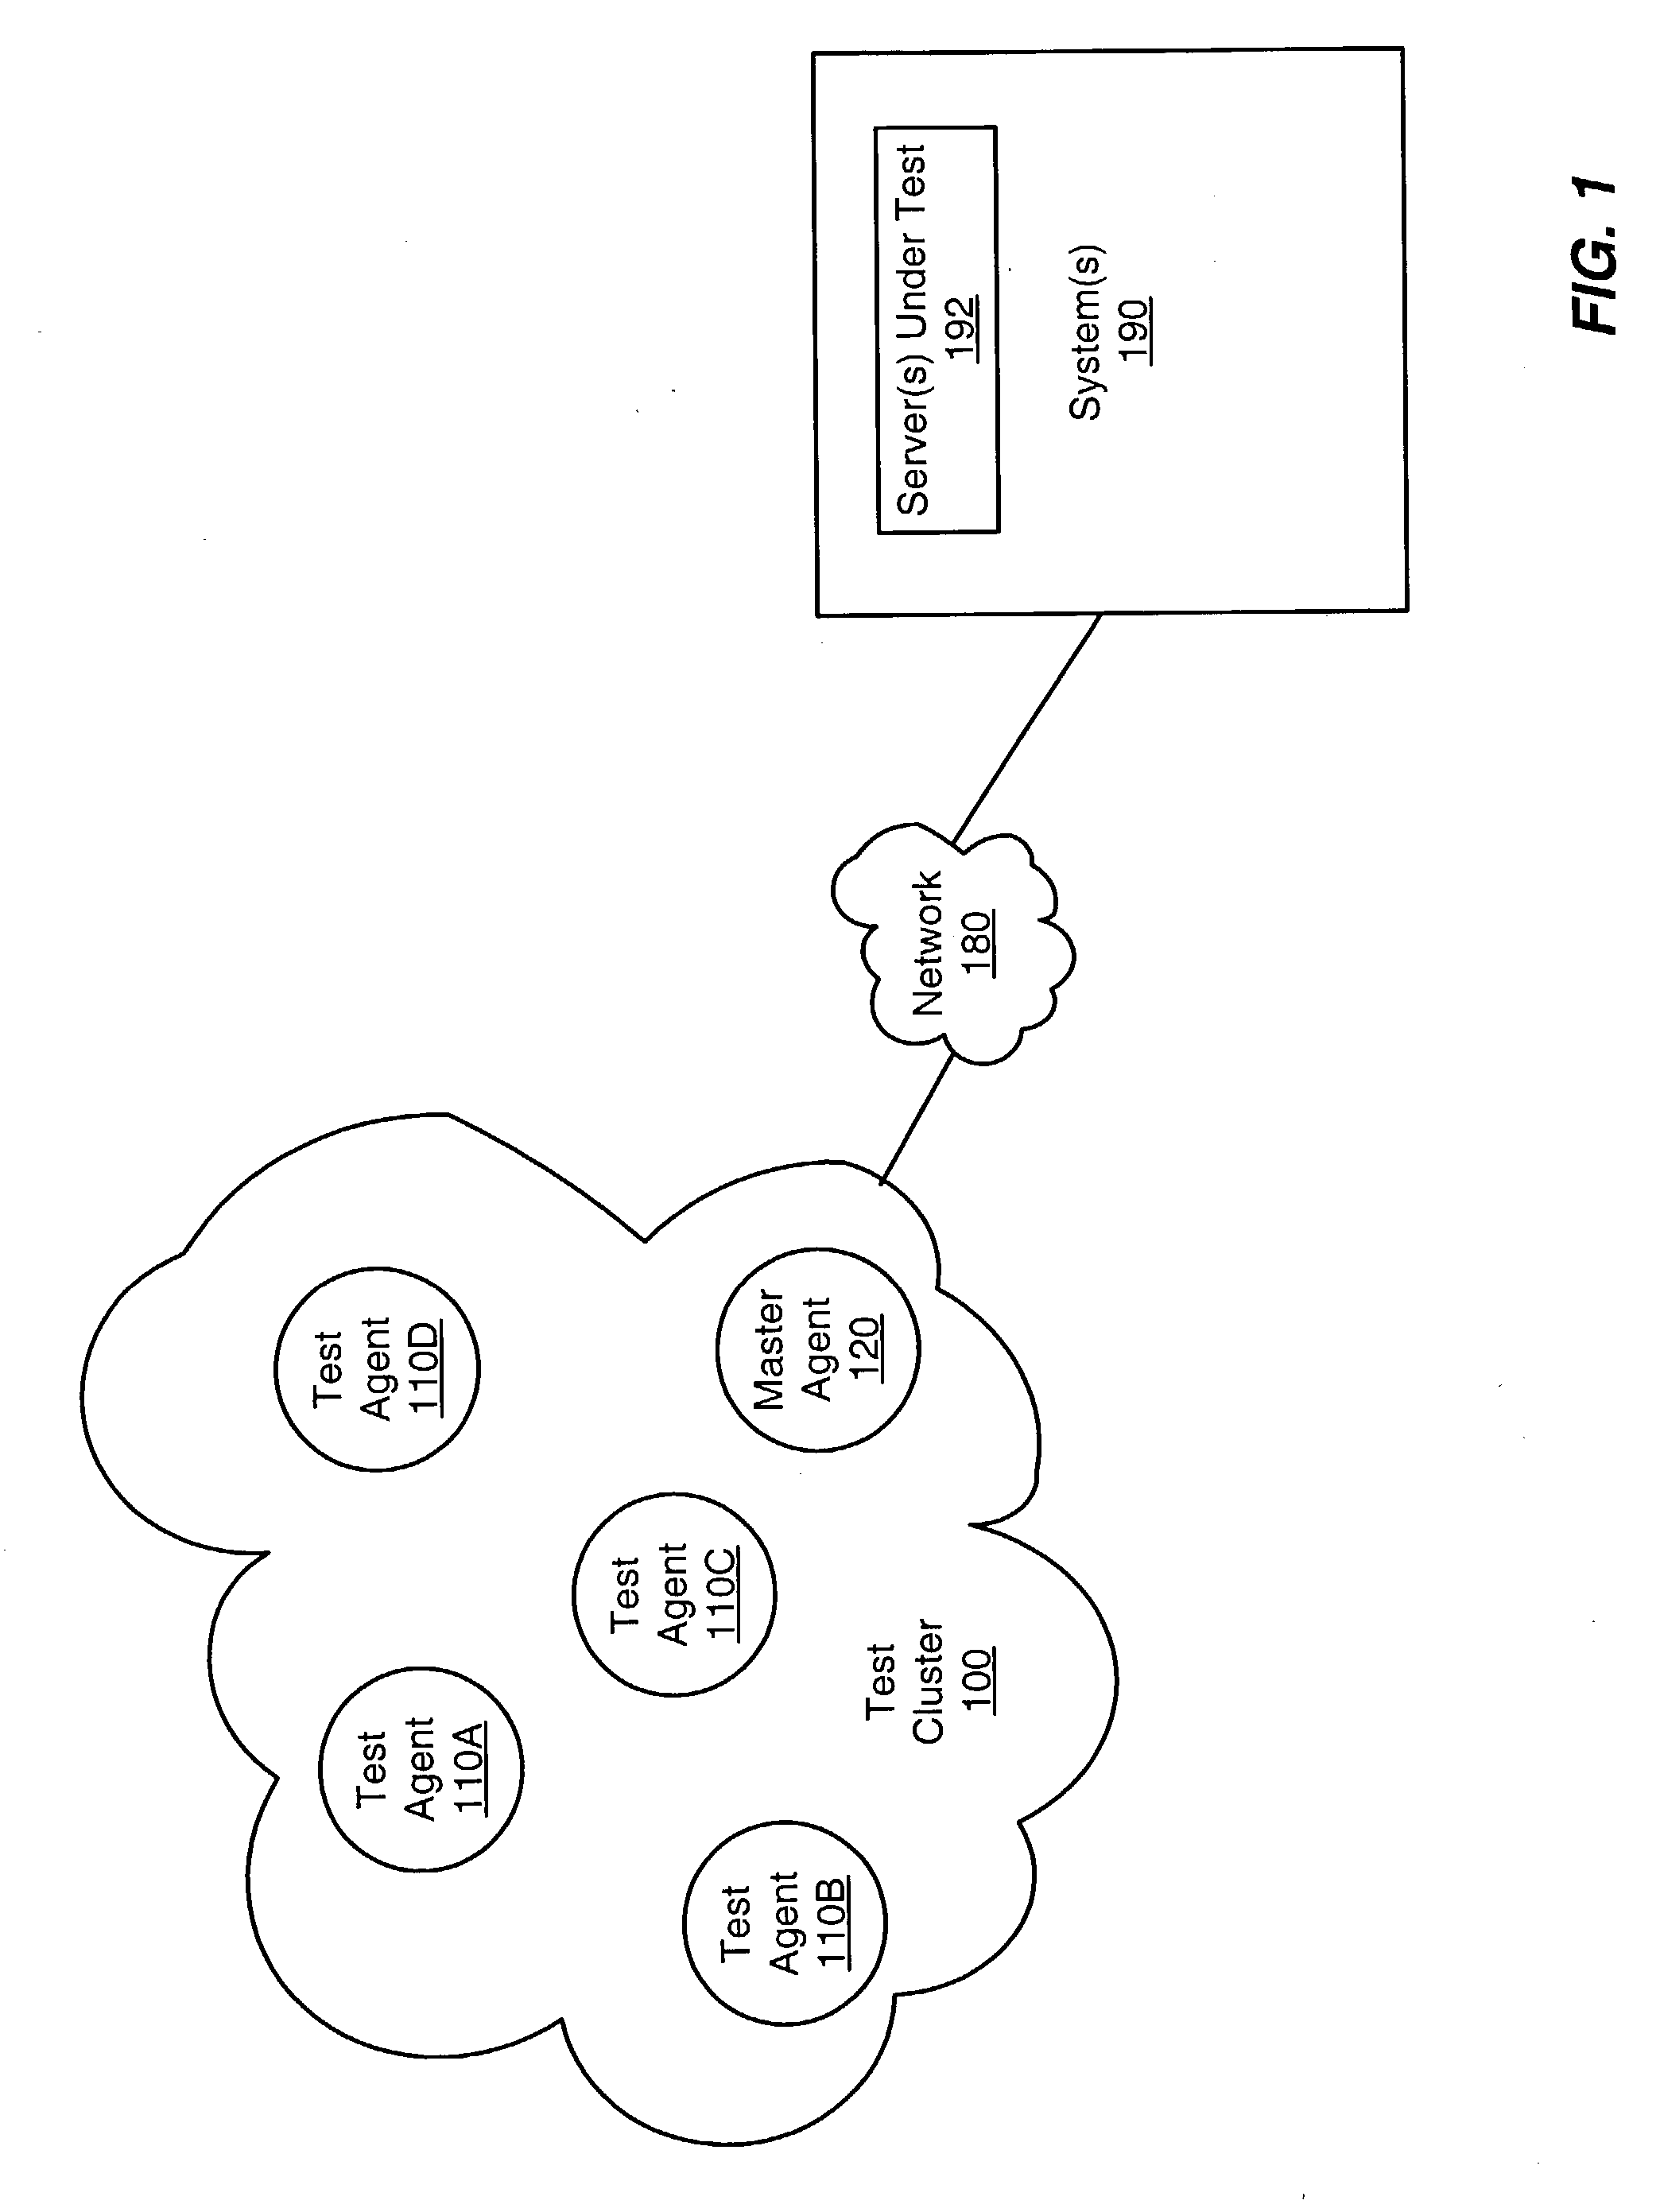 System and method for measuring performance with distributed agents